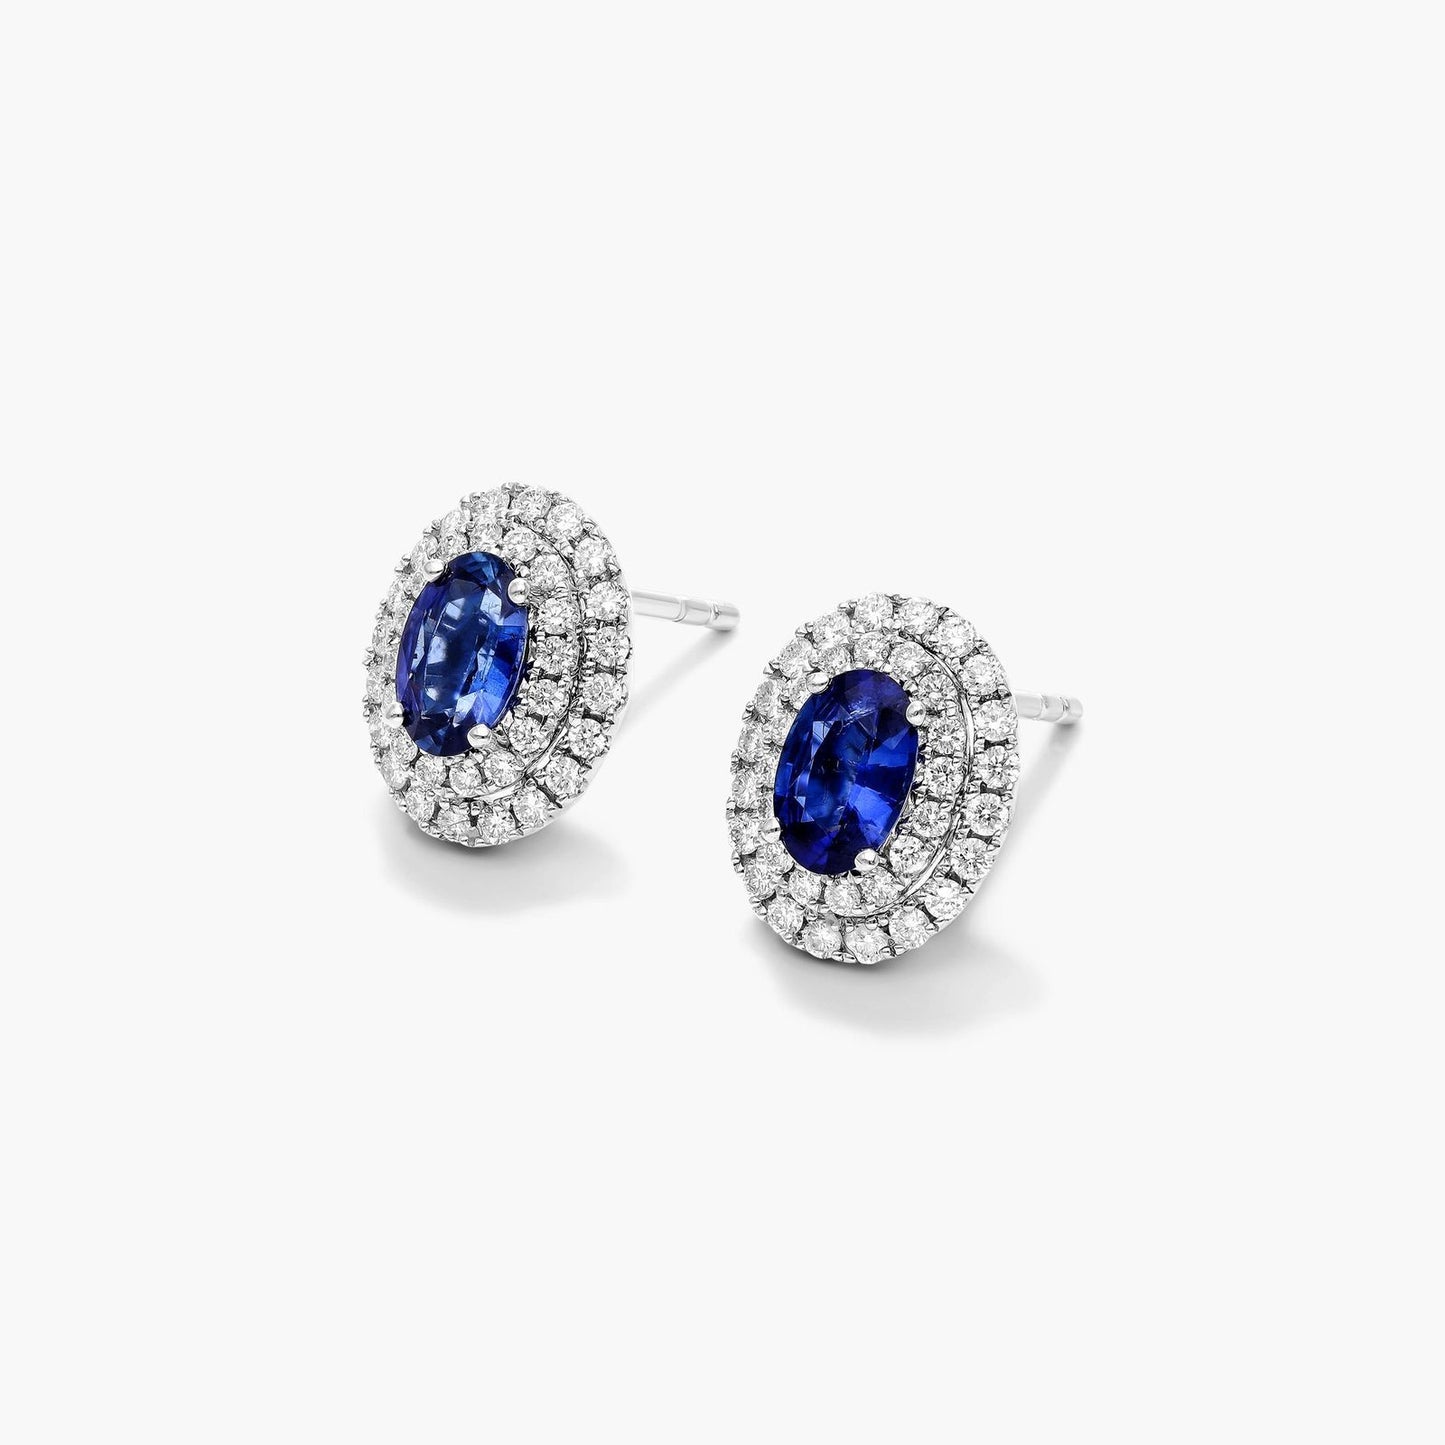 18K White Gold Double Halo Oval Sapphire And Diamond Earrings